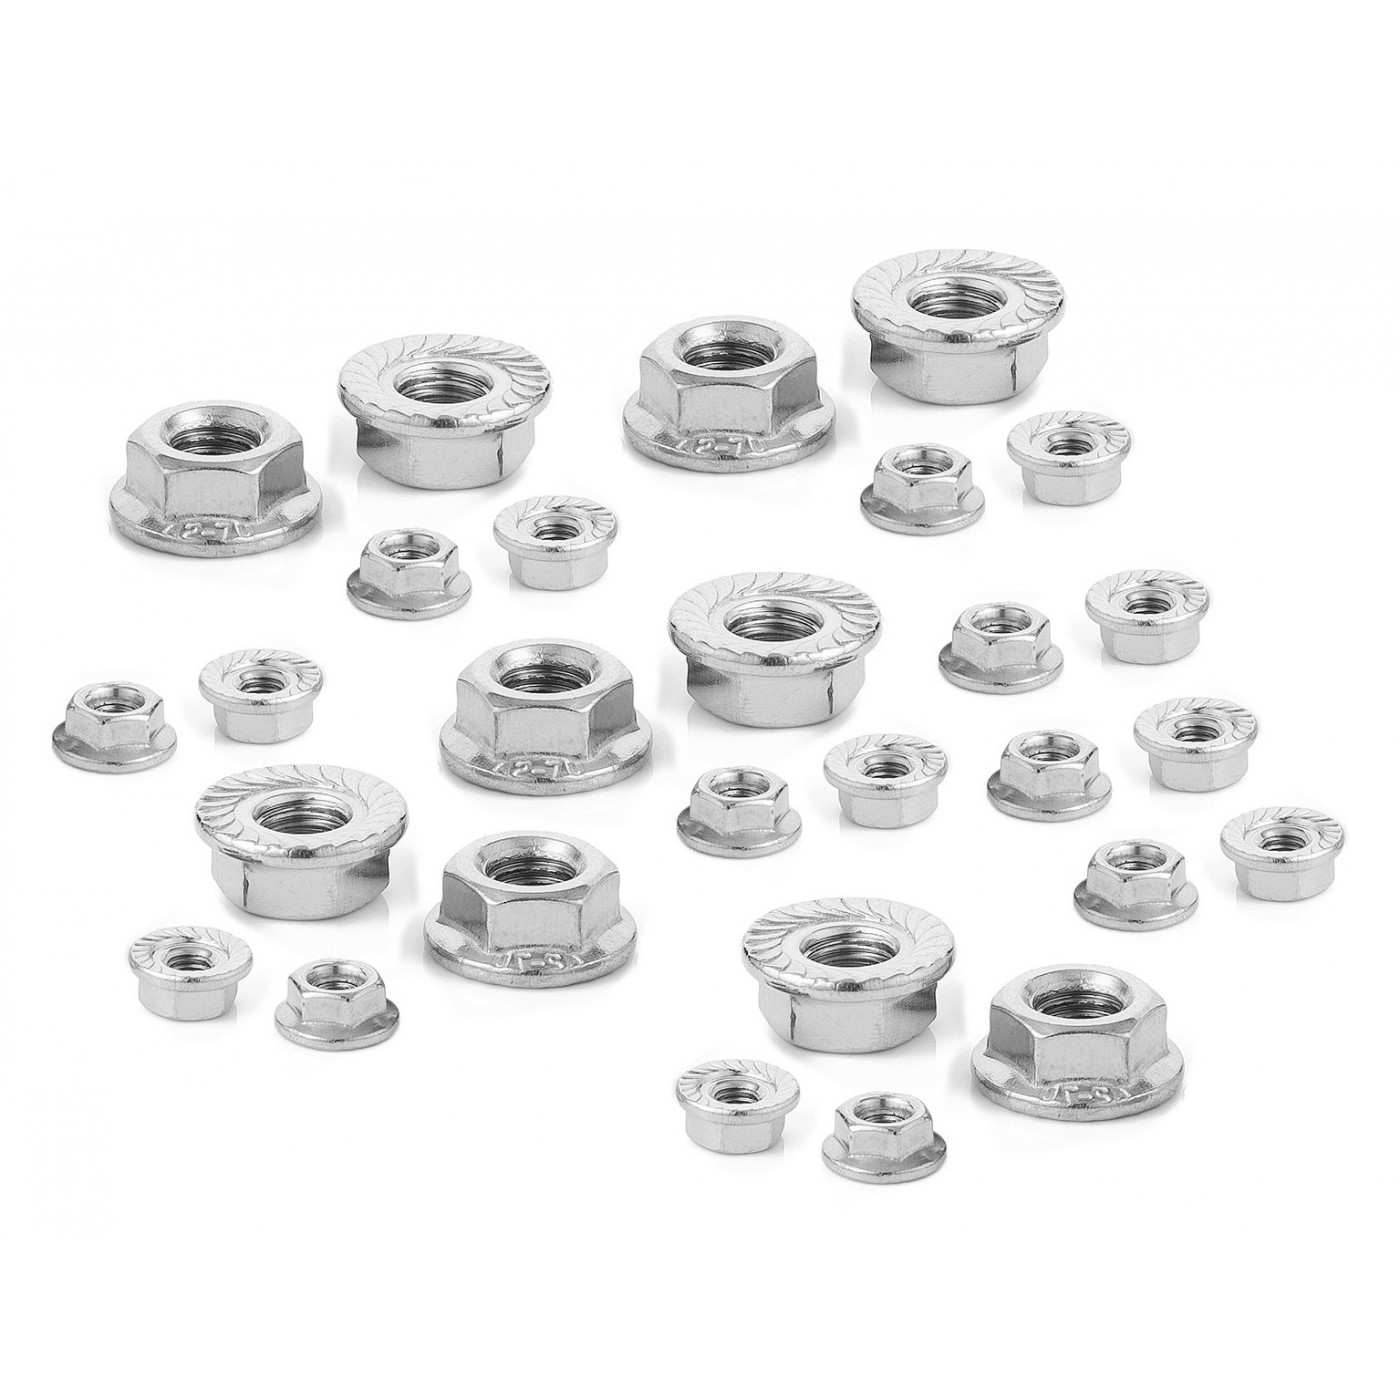 Stainless Serrated Flange Nuts M4 M5 M6 Mixed Pack 75 